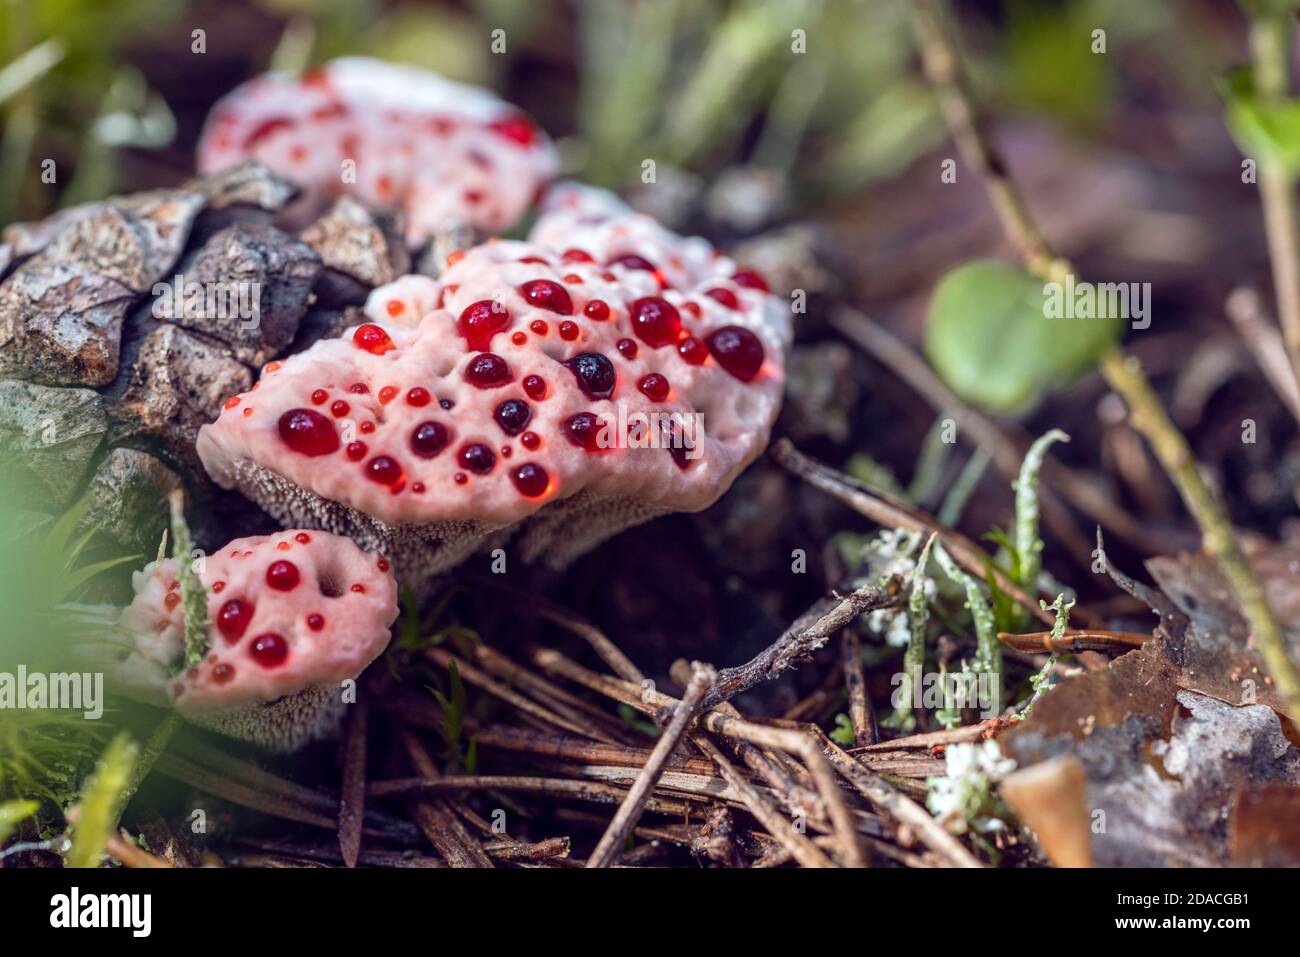 Inedible Hydnellum peckii fungus with funnel-shaped cap with a white edge and bright red guttation droplets, common names: strawberries and cream Stock Photo